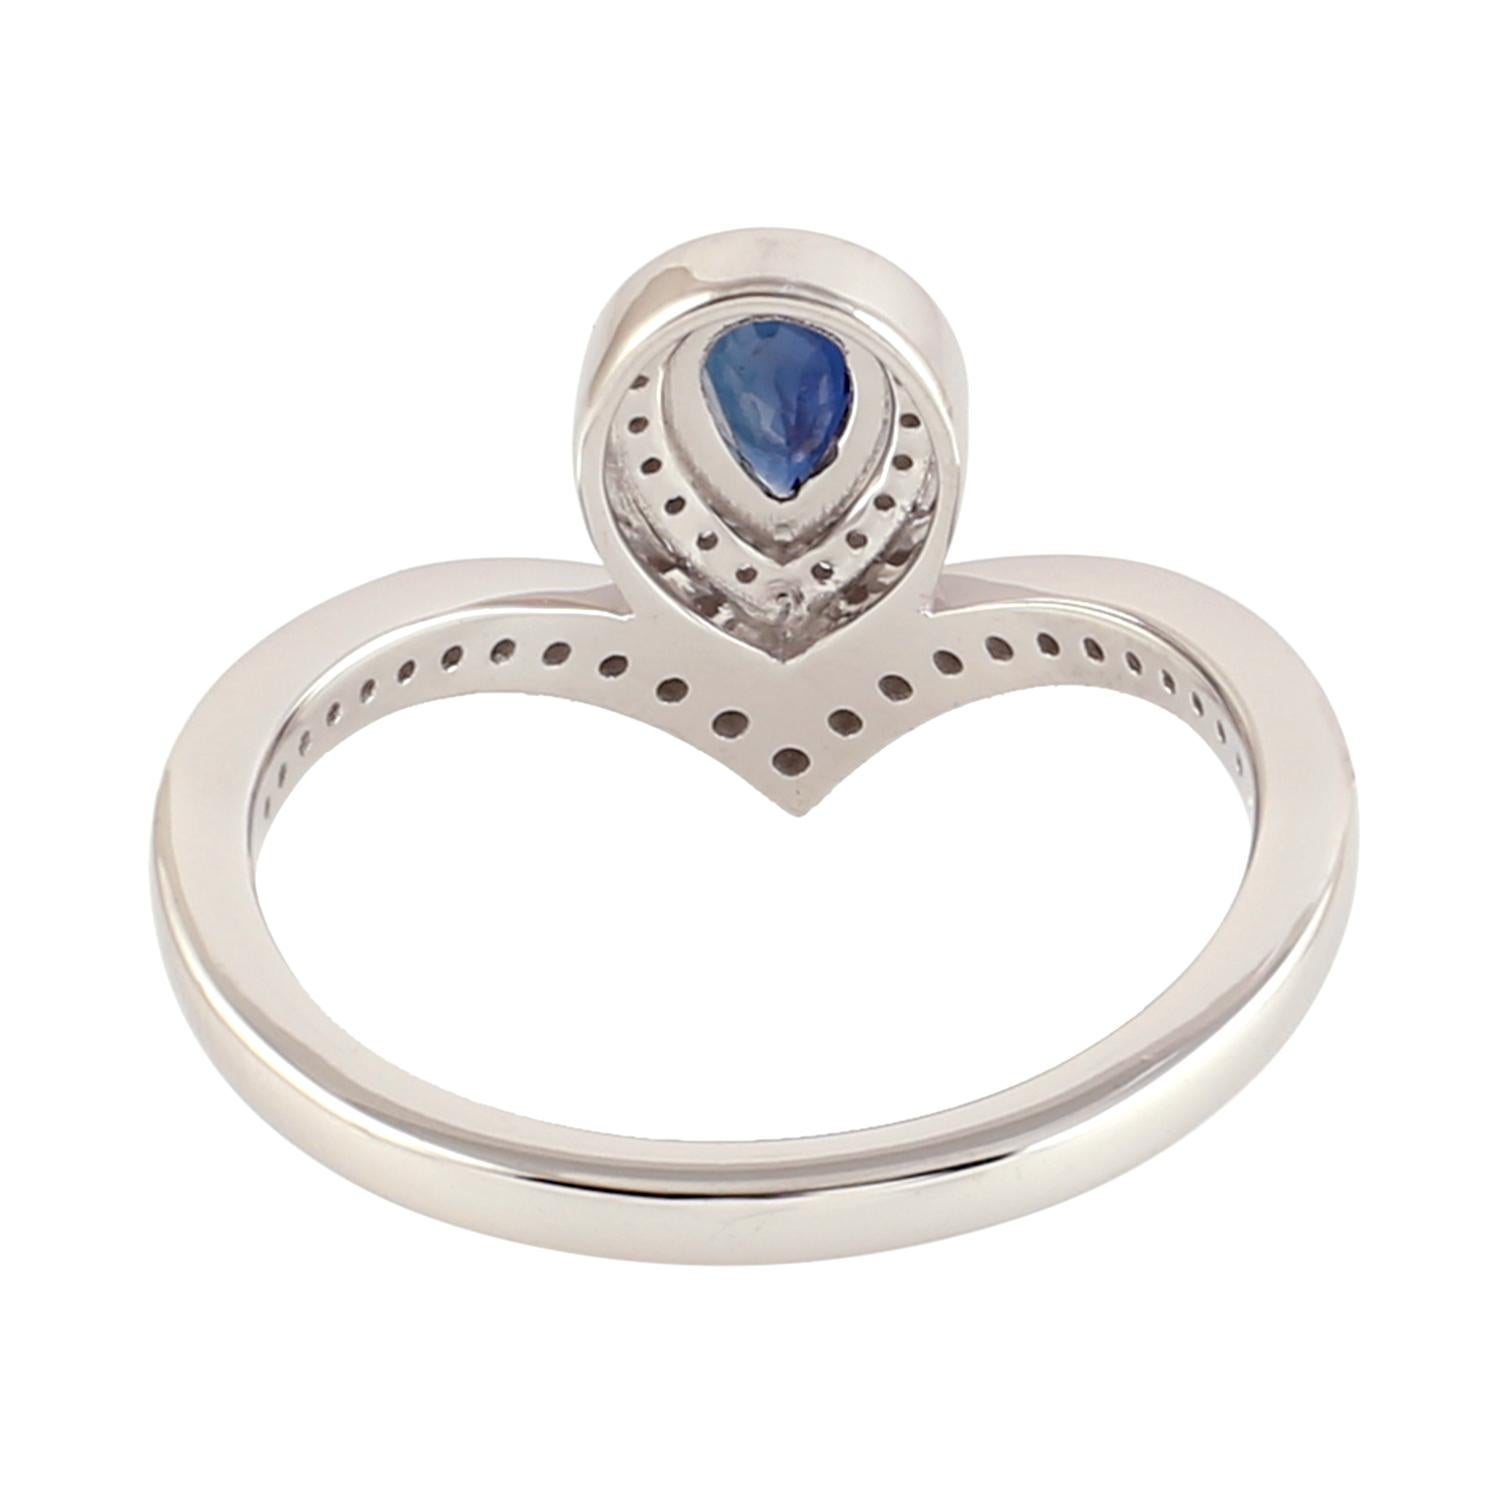 This stunning ring features a pear-shaped blue sapphire with pave diamond setting and made from 18k white gold. The sapphire is a rich, deep blue color and is cut into a pear shape, which gives the ring a unique and elegant look. The pave diamond